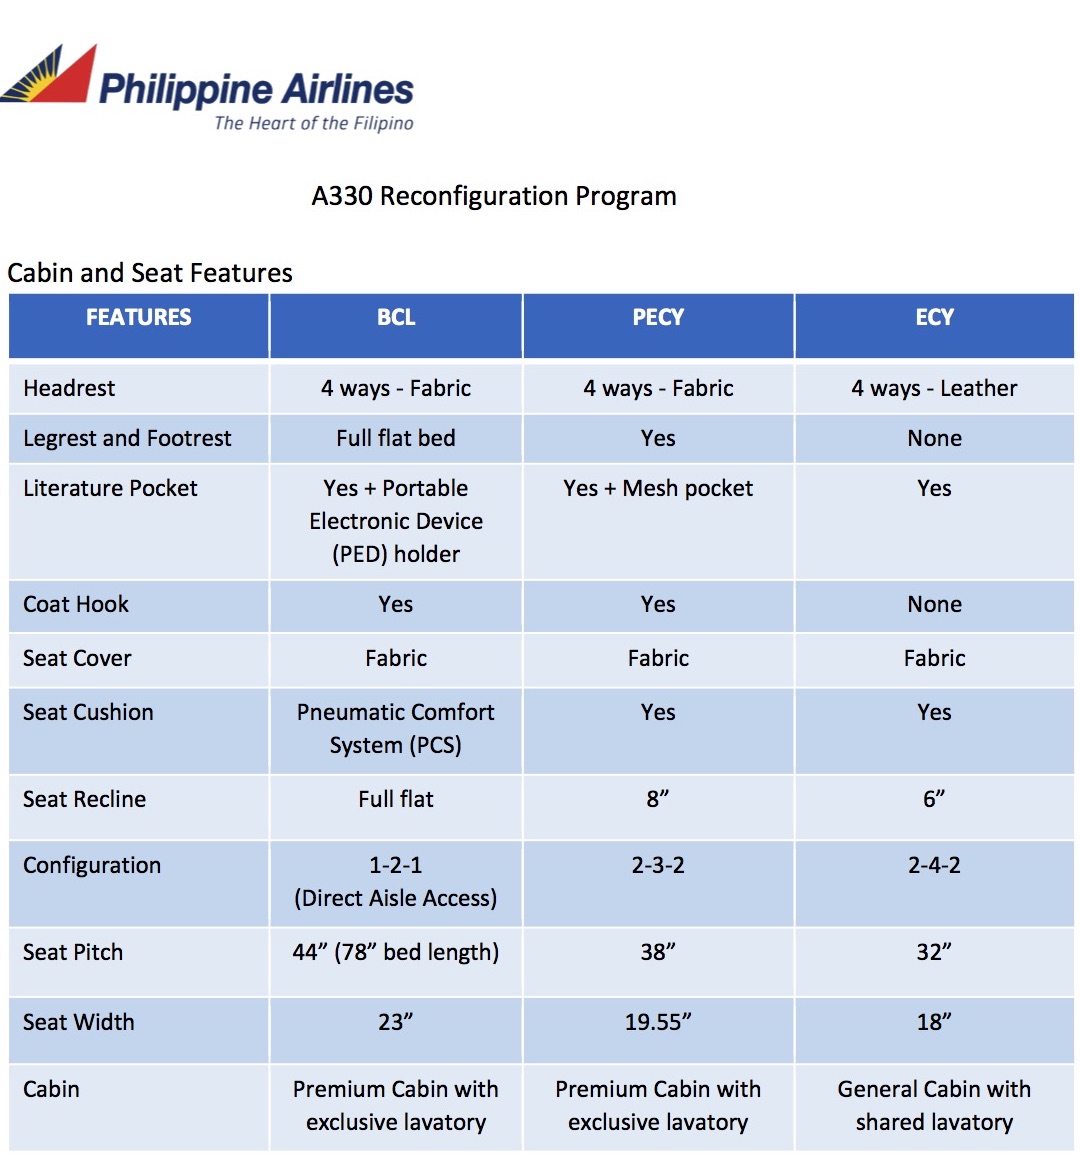 PAL rolls out tri-class A330 with New Premium Economy | Inquirer